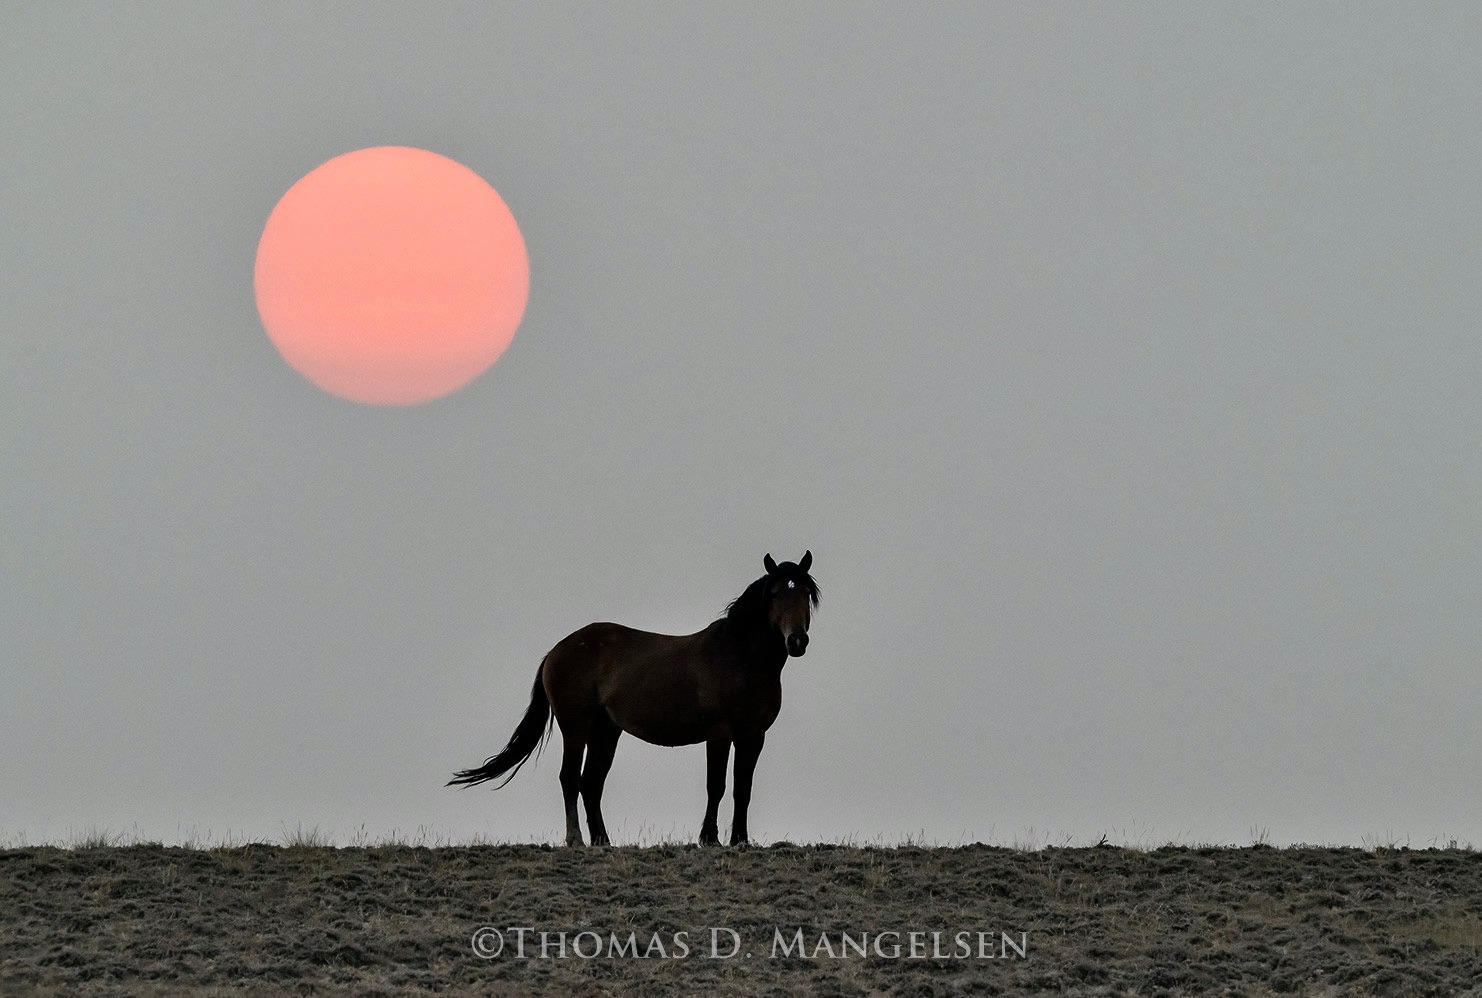 "Under the Red Sun," a photograph by Thomas D. Mangelsen, all rights reserved. This is a portrait of a member of the North Lander Herd in central Wyoming. To see more of Mangelsen's limited-edition collectible photography go to mangelsen.com